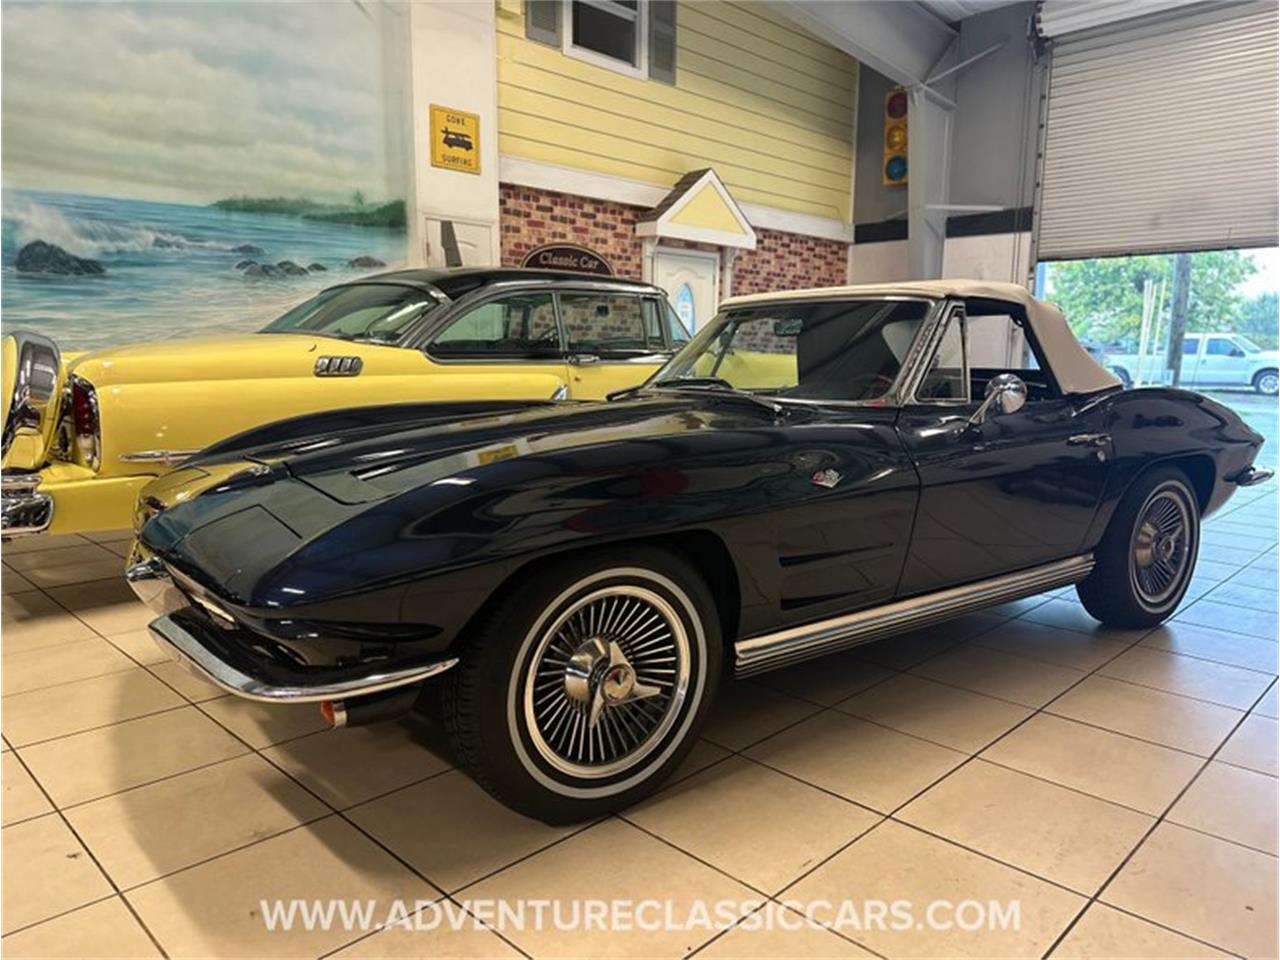 For Sale: 1964 Chevrolet Corvette in Clearwater, Florida for sale in Clearwater, FL